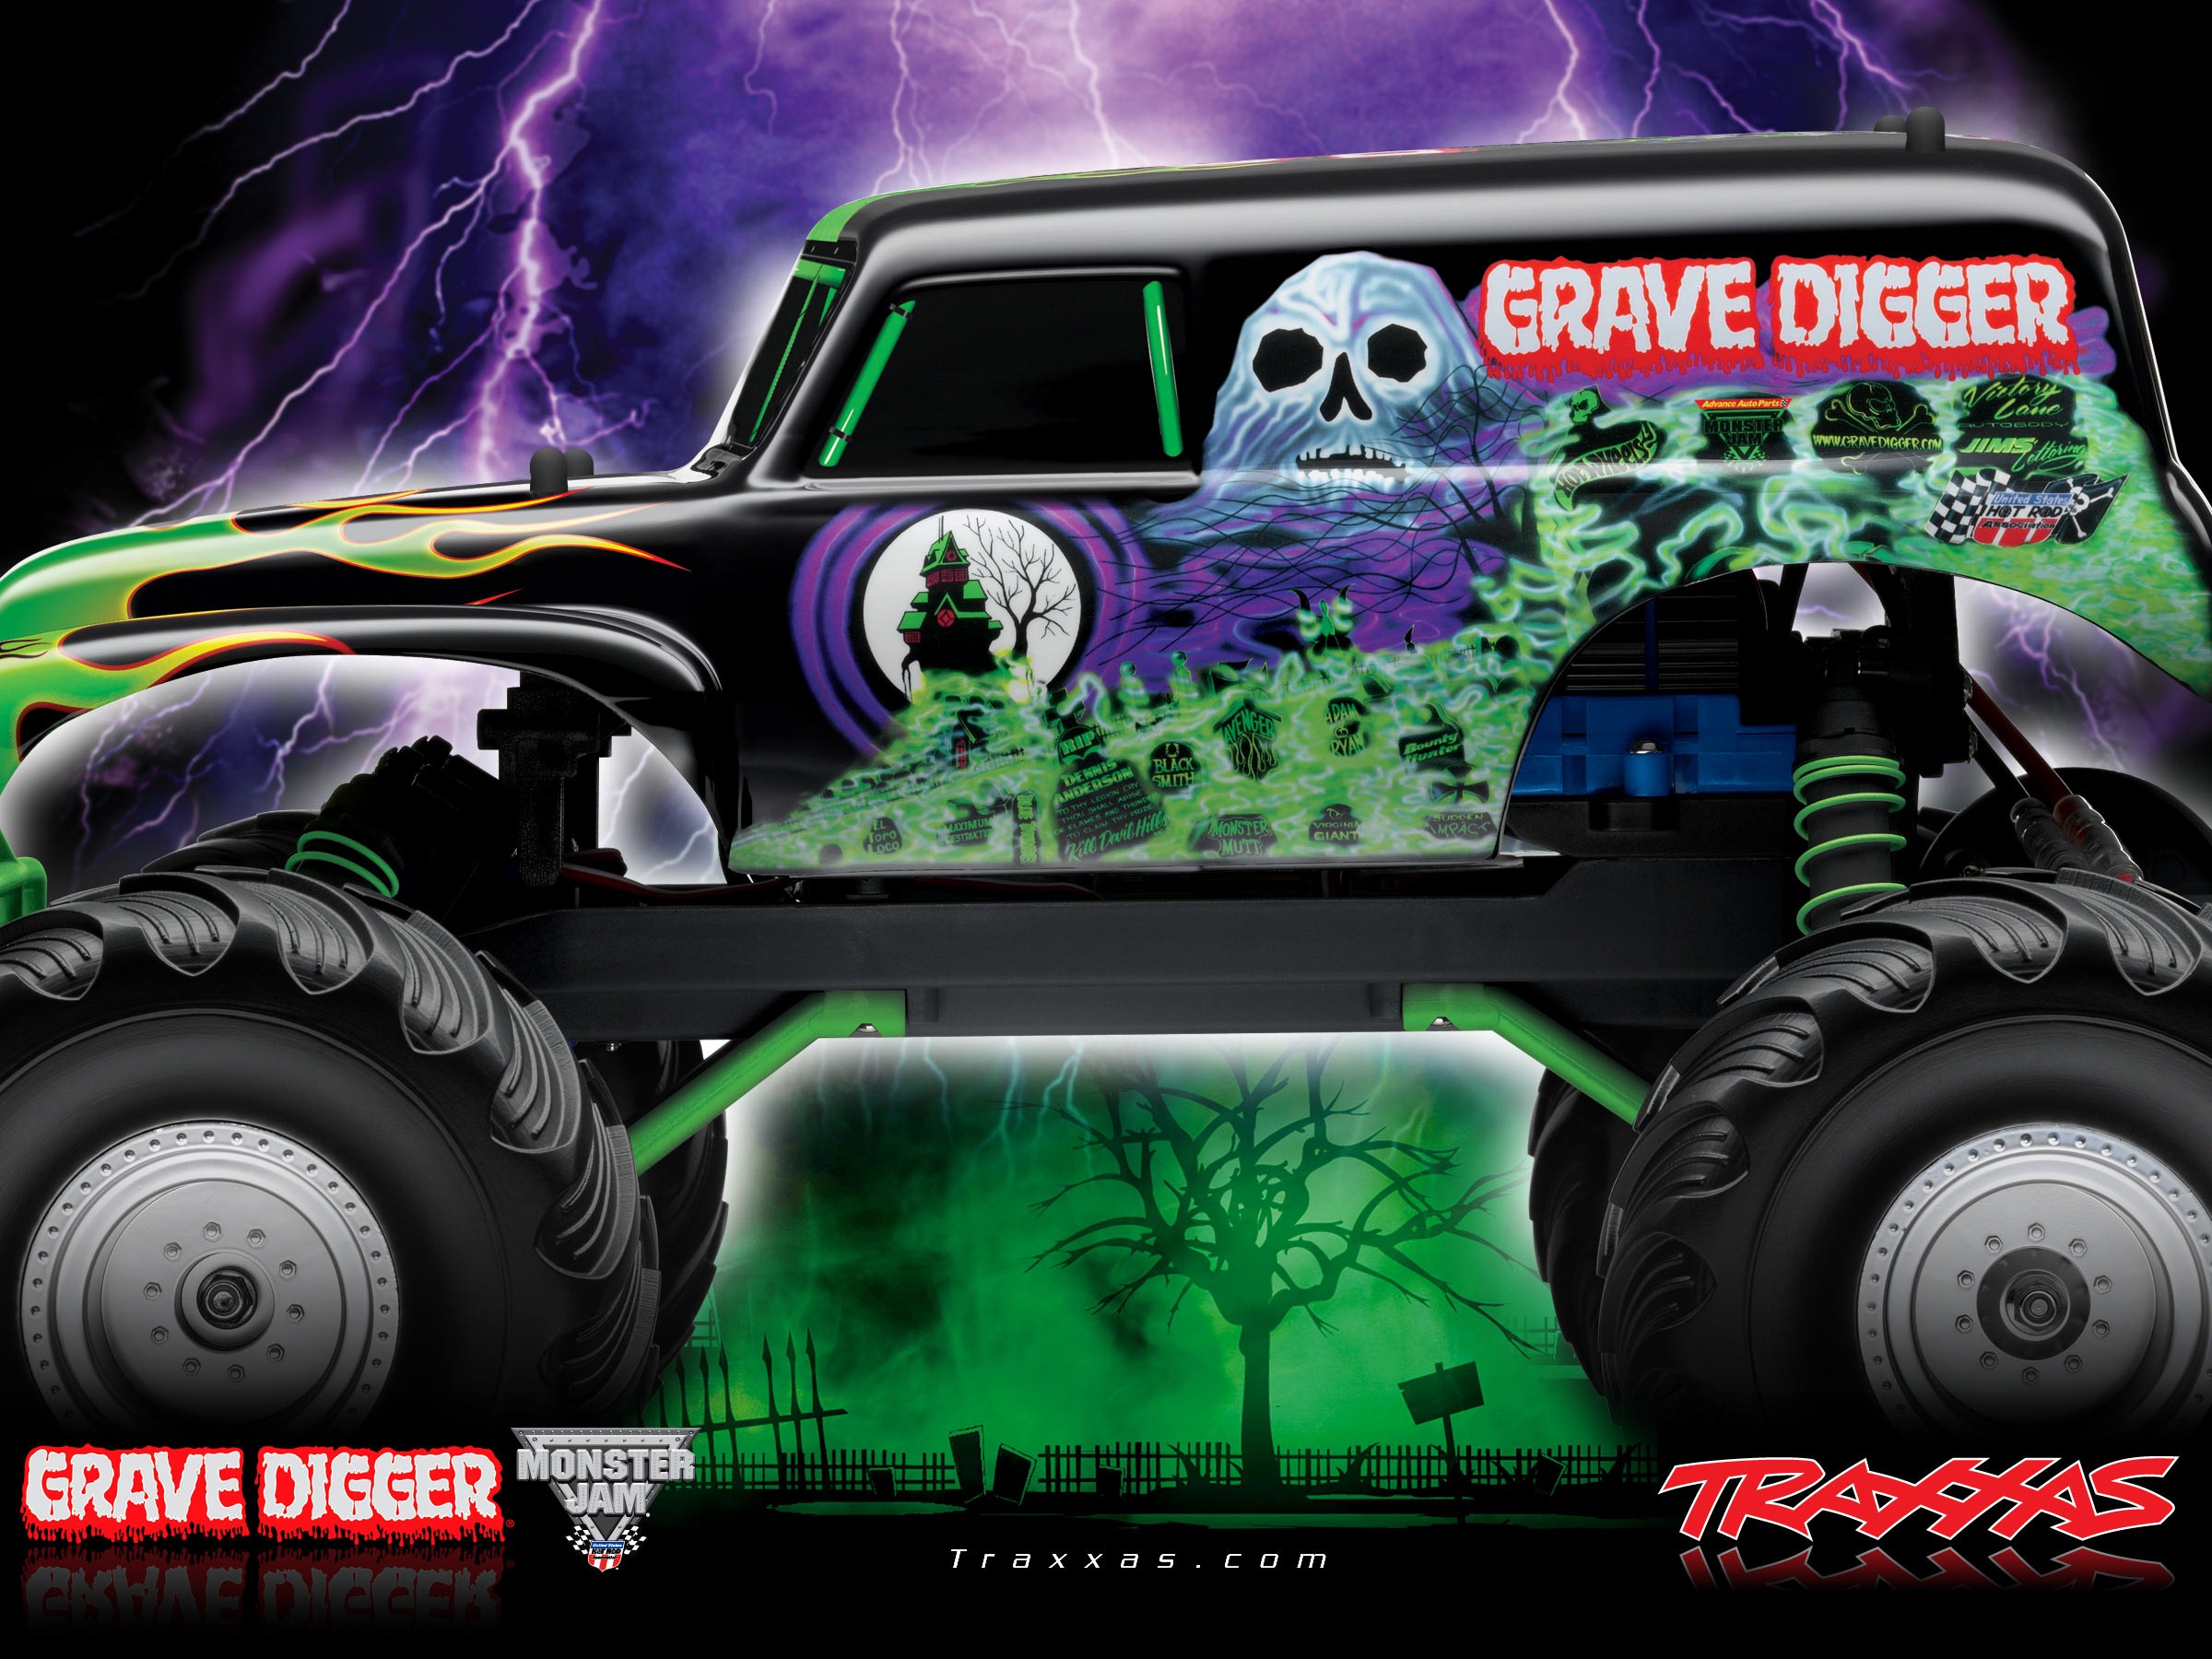 Drawn Truck Grave Digger Monster Rc Car